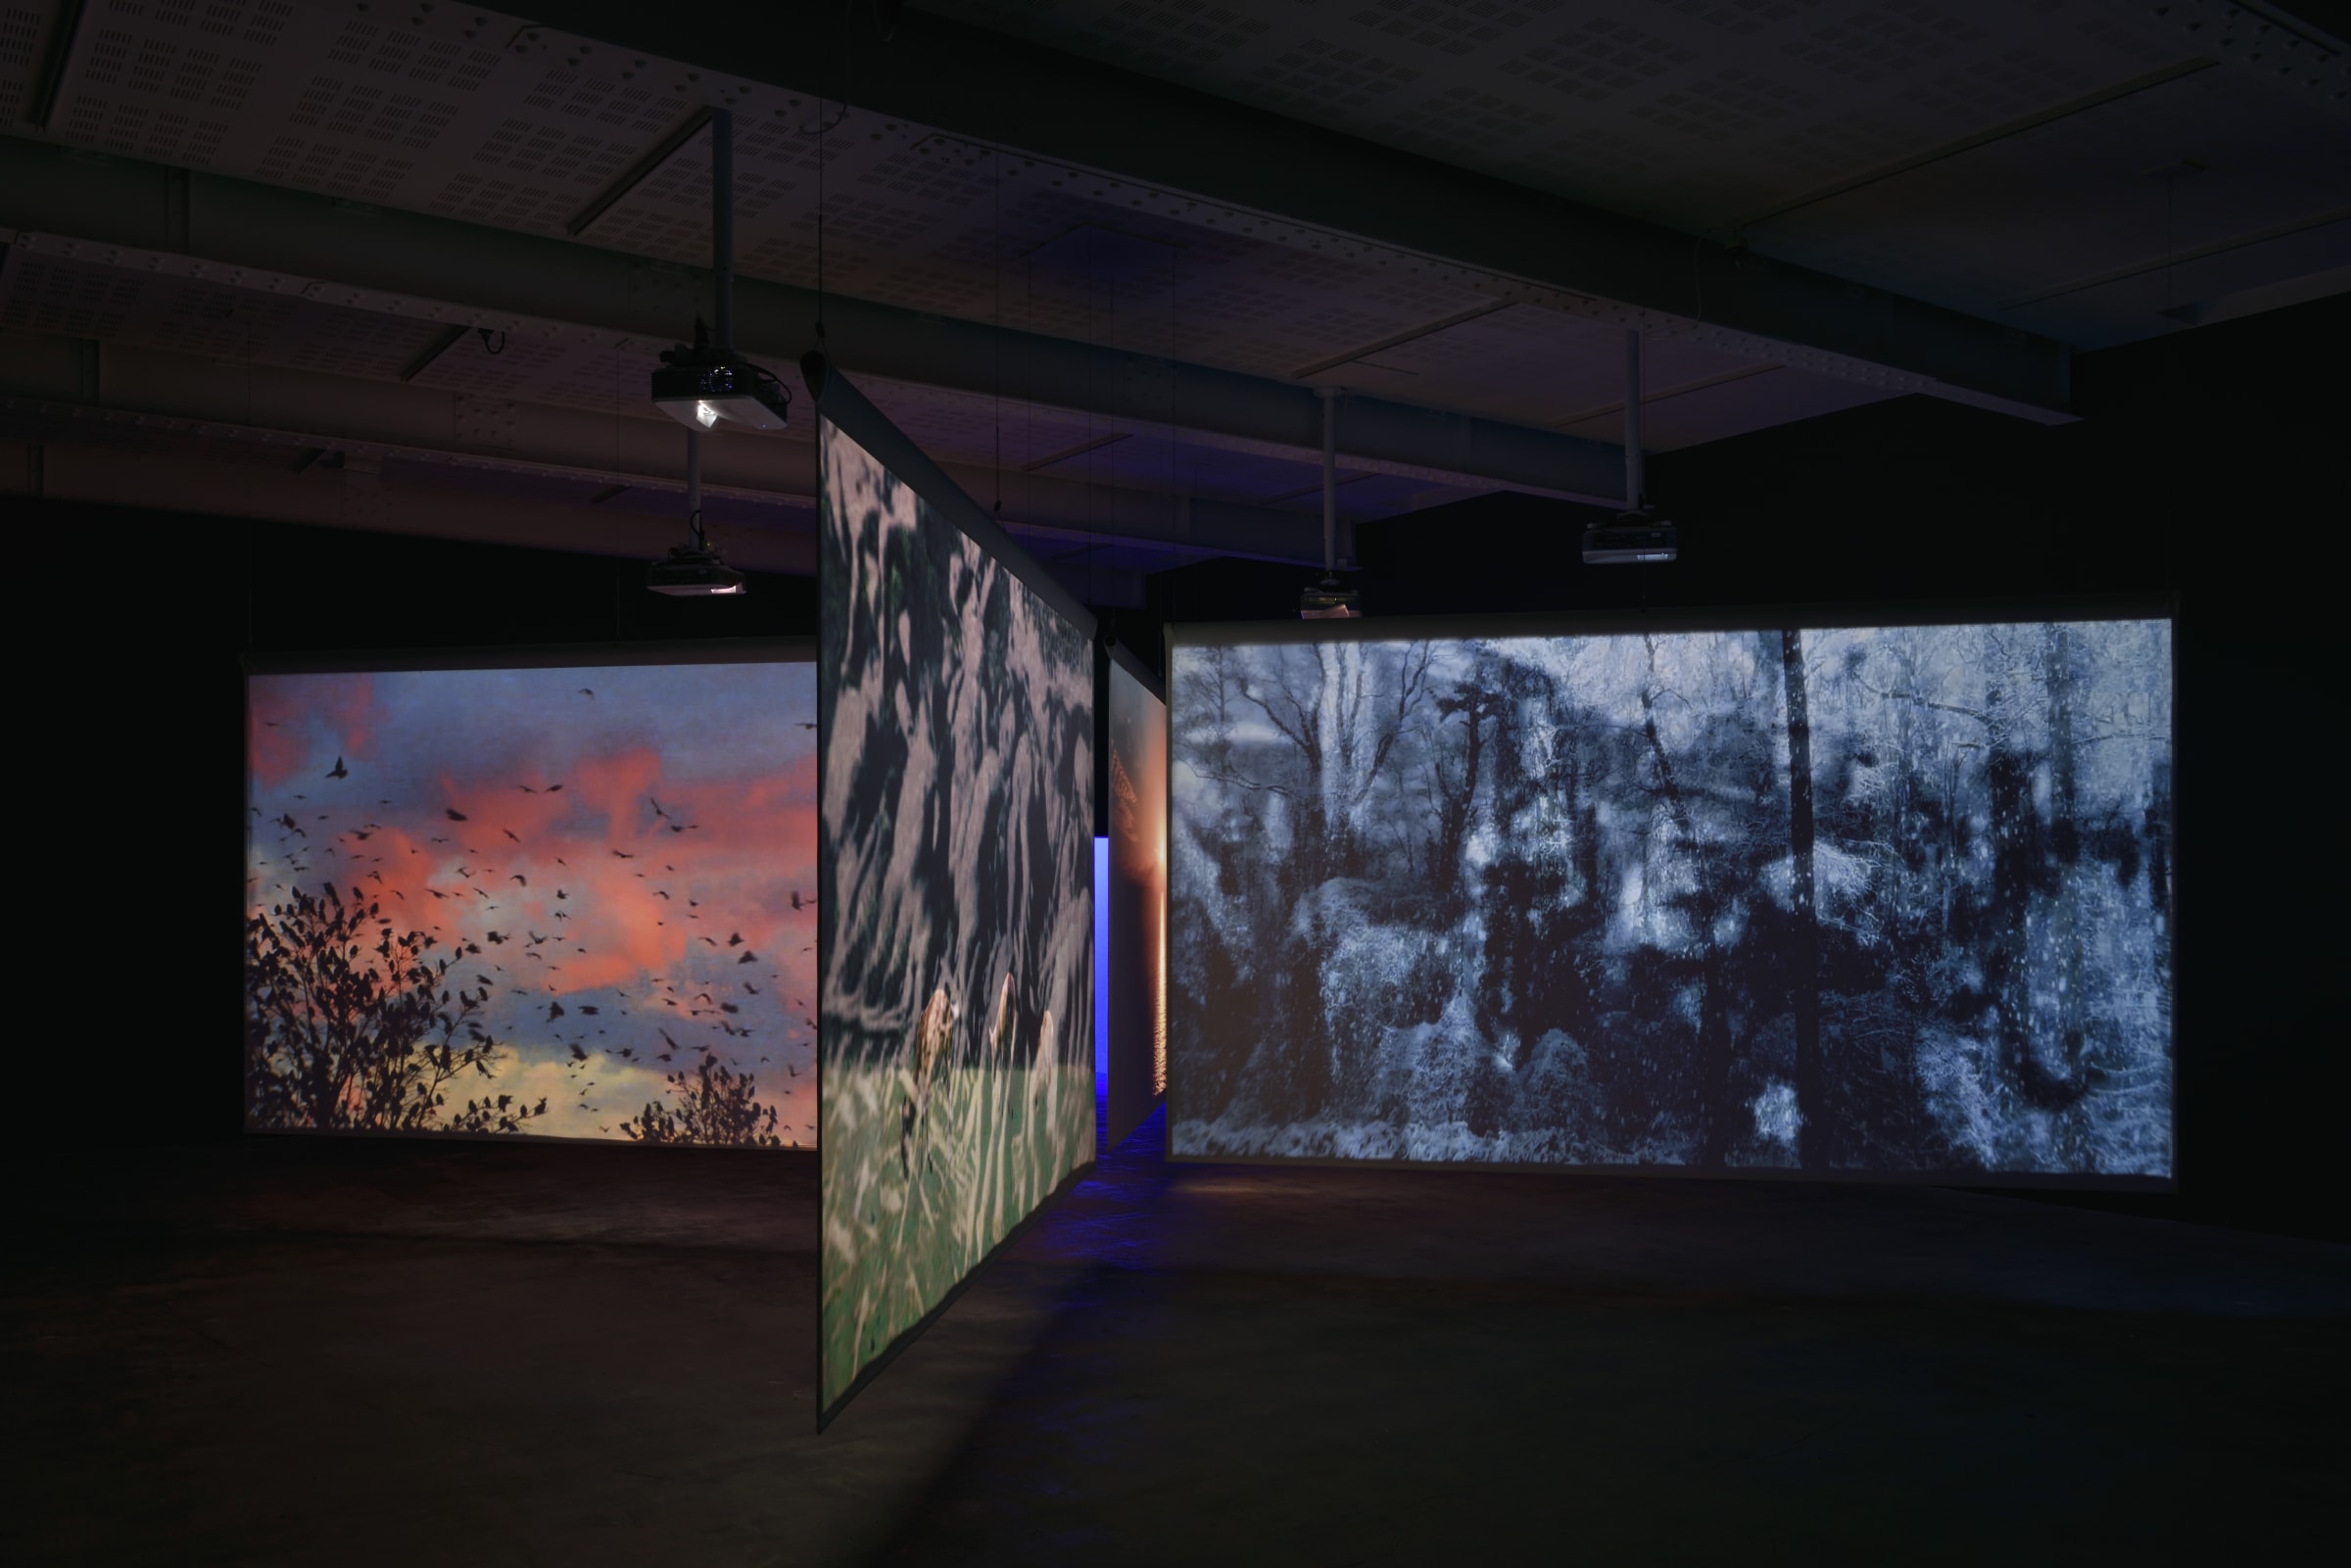 A series of film projections at Marian Goodman Gallery Paris